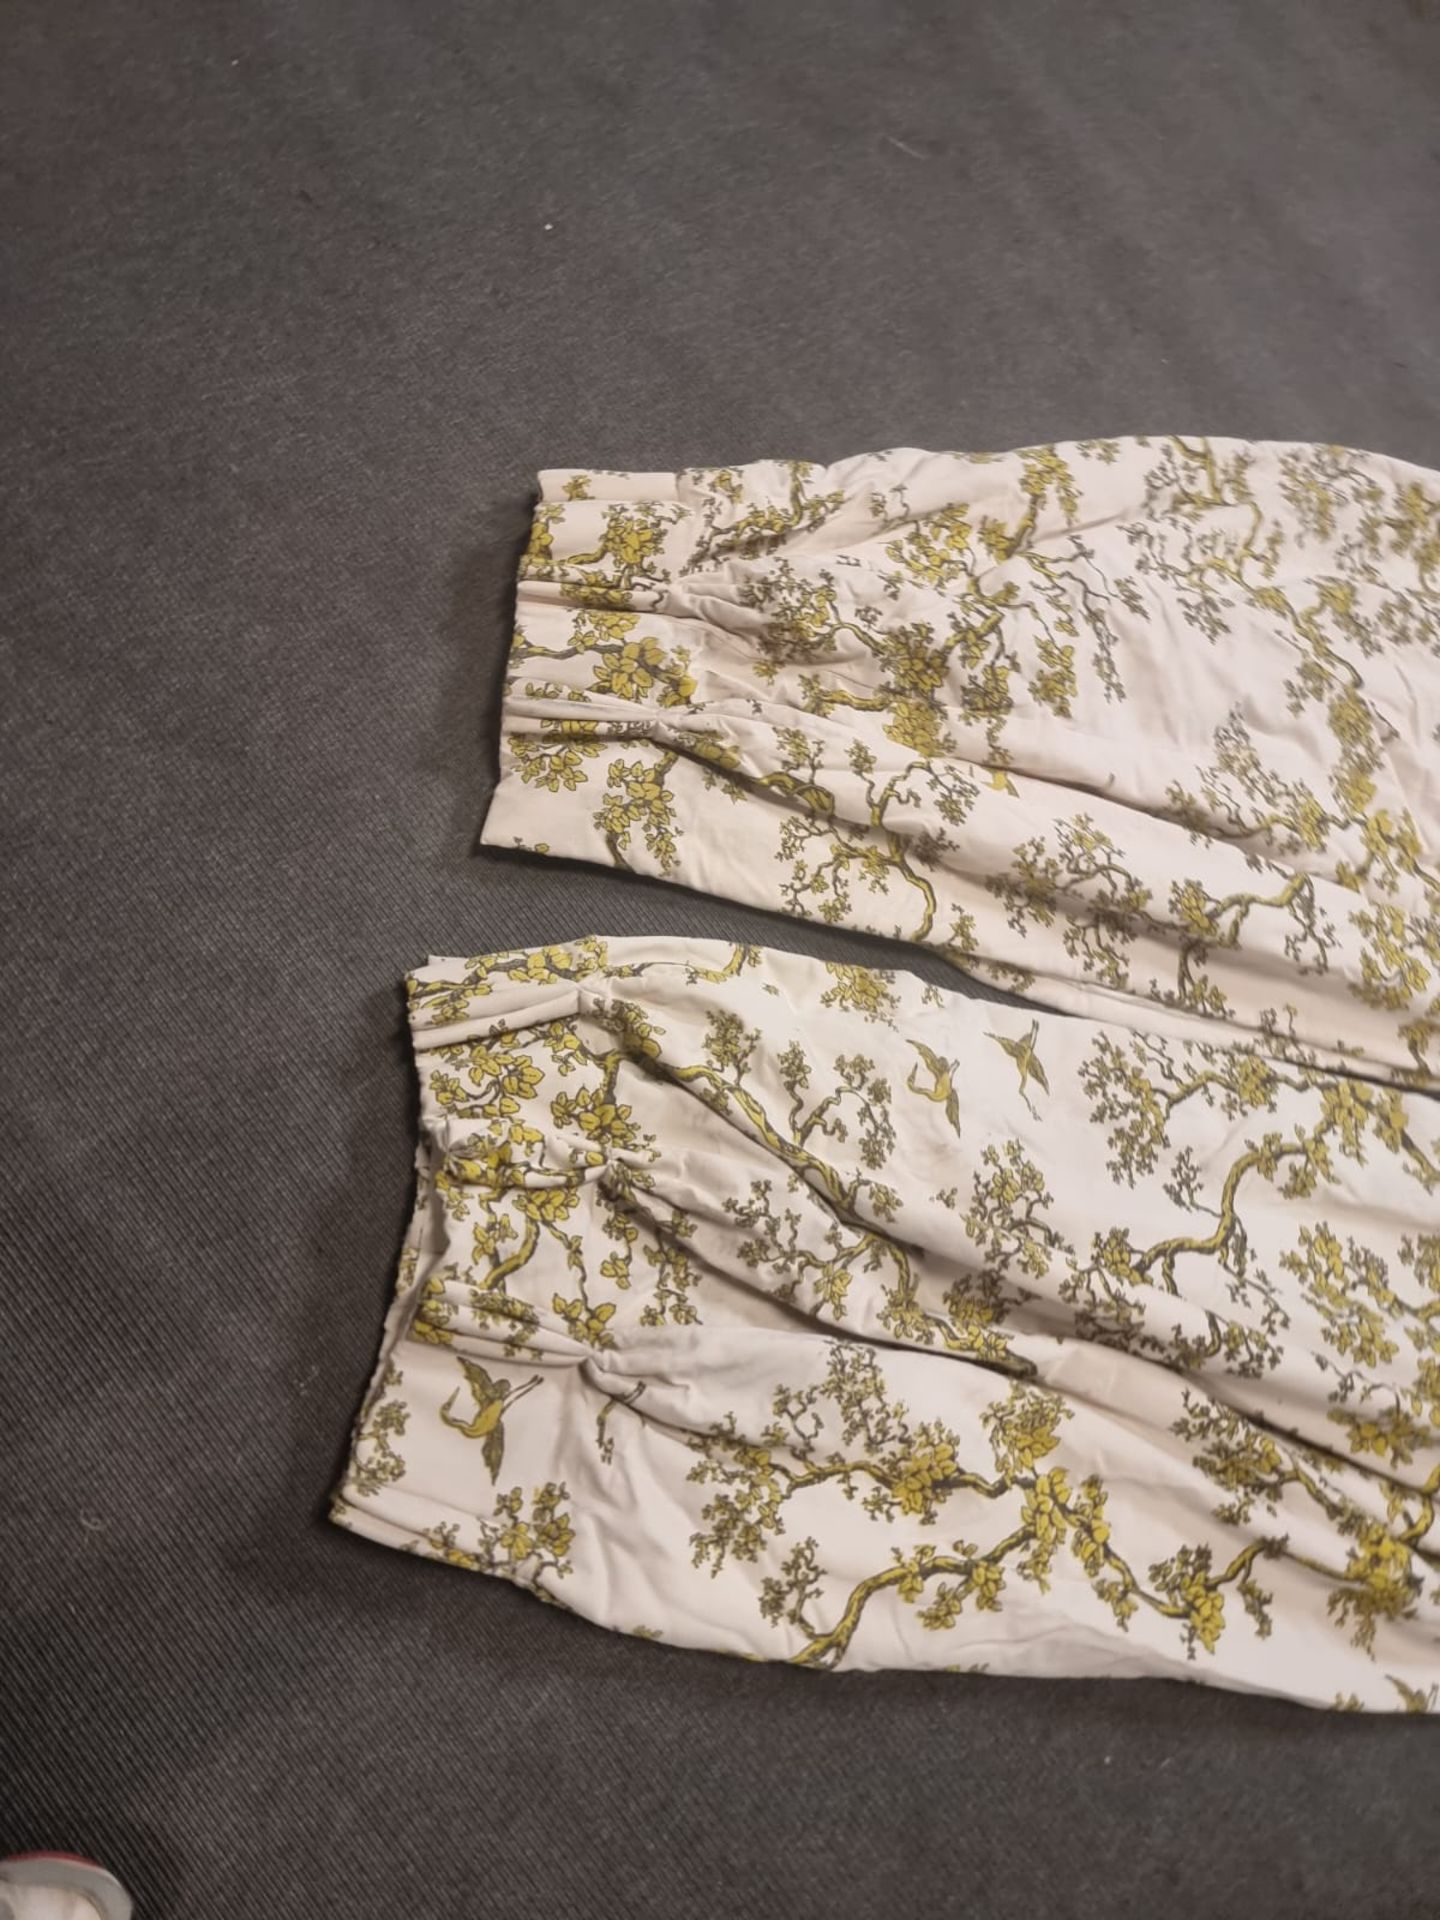 A pair of fully lined luxury cotton drapes in cream with exotic tree and birds repeating pattern - Image 6 of 6